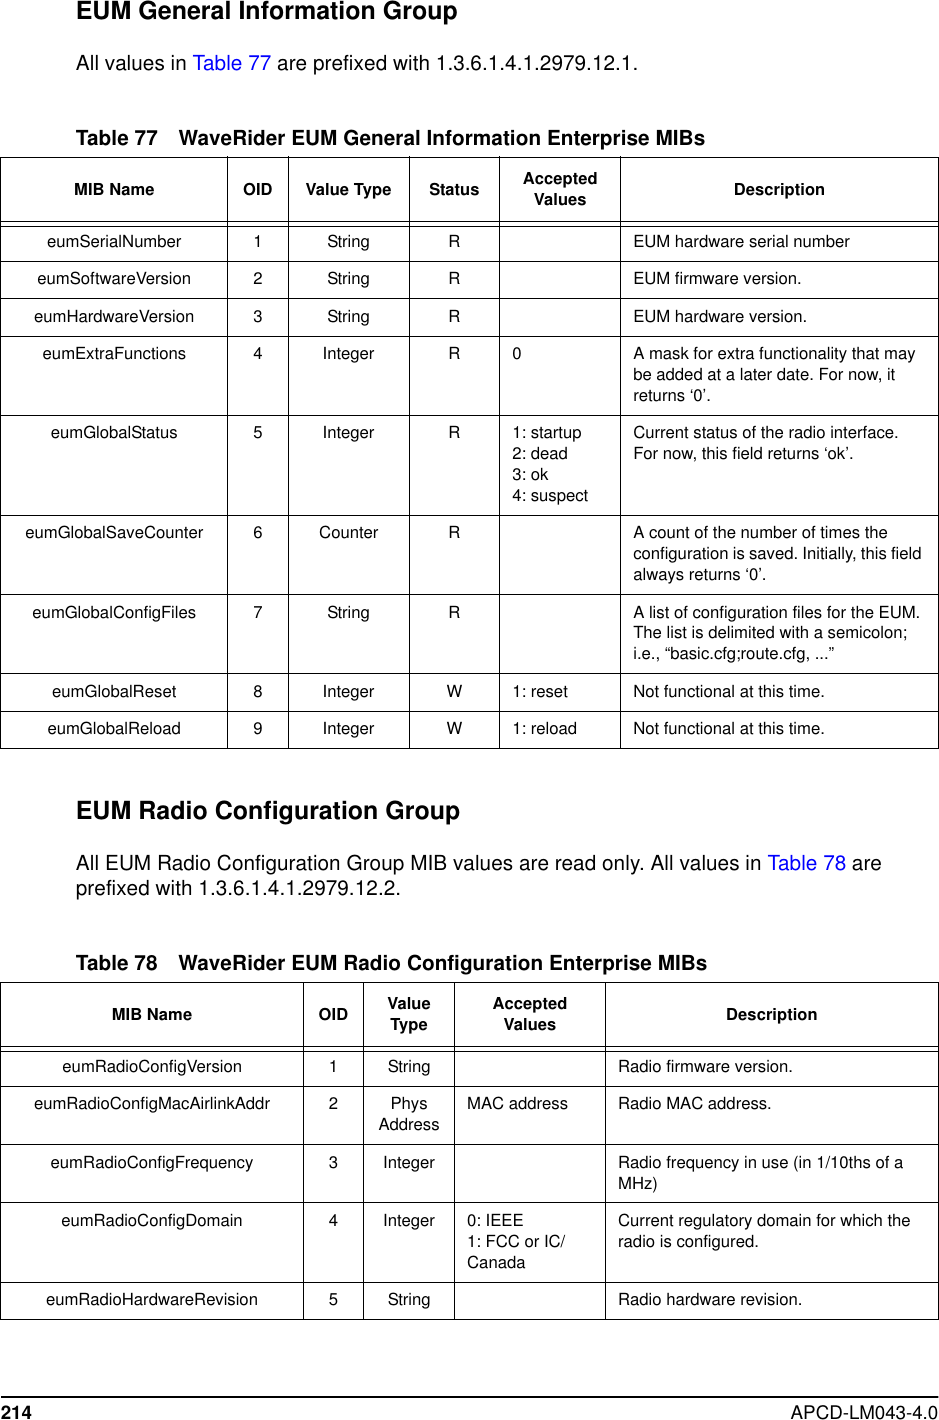 214 APCD-LM043-4.0EUM General Information GroupAll values in Table 77 are prefixed with 1.3.6.1.4.1.2979.12.1.Table 77 WaveRider EUM General Information Enterprise MIBsEUM Radio Configuration GroupAll EUM Radio Configuration Group MIB values are read only. All values in Table 78 areprefixed with 1.3.6.1.4.1.2979.12.2.Table 78 WaveRider EUM Radio Configuration Enterprise MIBsMIB Name OID Value Type Status AcceptedValues DescriptioneumSerialNumber 1 String R EUM hardware serial numbereumSoftwareVersion 2String REUM firmware version.eumHardwareVersion 3String REUM hardware version.eumExtraFunctions 4Integer R 0 A mask for extra functionality that maybe added at a later date. For now, itreturns ‘0’.eumGlobalStatus 5Integer R1: startup2: dead3: ok4: suspectCurrent status of the radio interface.For now, this field returns ‘ok’.eumGlobalSaveCounter 6Counter RA count of the number of times theconfiguration is saved. Initially, this fieldalways returns ‘0’.eumGlobalConfigFiles 7String RA list of configuration files for the EUM.The list is delimited with a semicolon;i.e., “basic.cfg;route.cfg, ...”eumGlobalReset 8Integer W1: reset Not functional at this time.eumGlobalReload 9Integer W1: reload Not functional at this time.MIB Name OID ValueType AcceptedValues DescriptioneumRadioConfigVersion 1 String Radio firmware version.eumRadioConfigMacAirlinkAddr 2PhysAddressMAC address Radio MAC address.eumRadioConfigFrequency 3Integer Radio frequency in use (in 1/10ths of aMHz)eumRadioConfigDomain 4Integer 0: IEEE1: FCC or IC/CanadaCurrent regulatory domain for which theradio is configured.eumRadioHardwareRevision 5String Radio hardware revision.